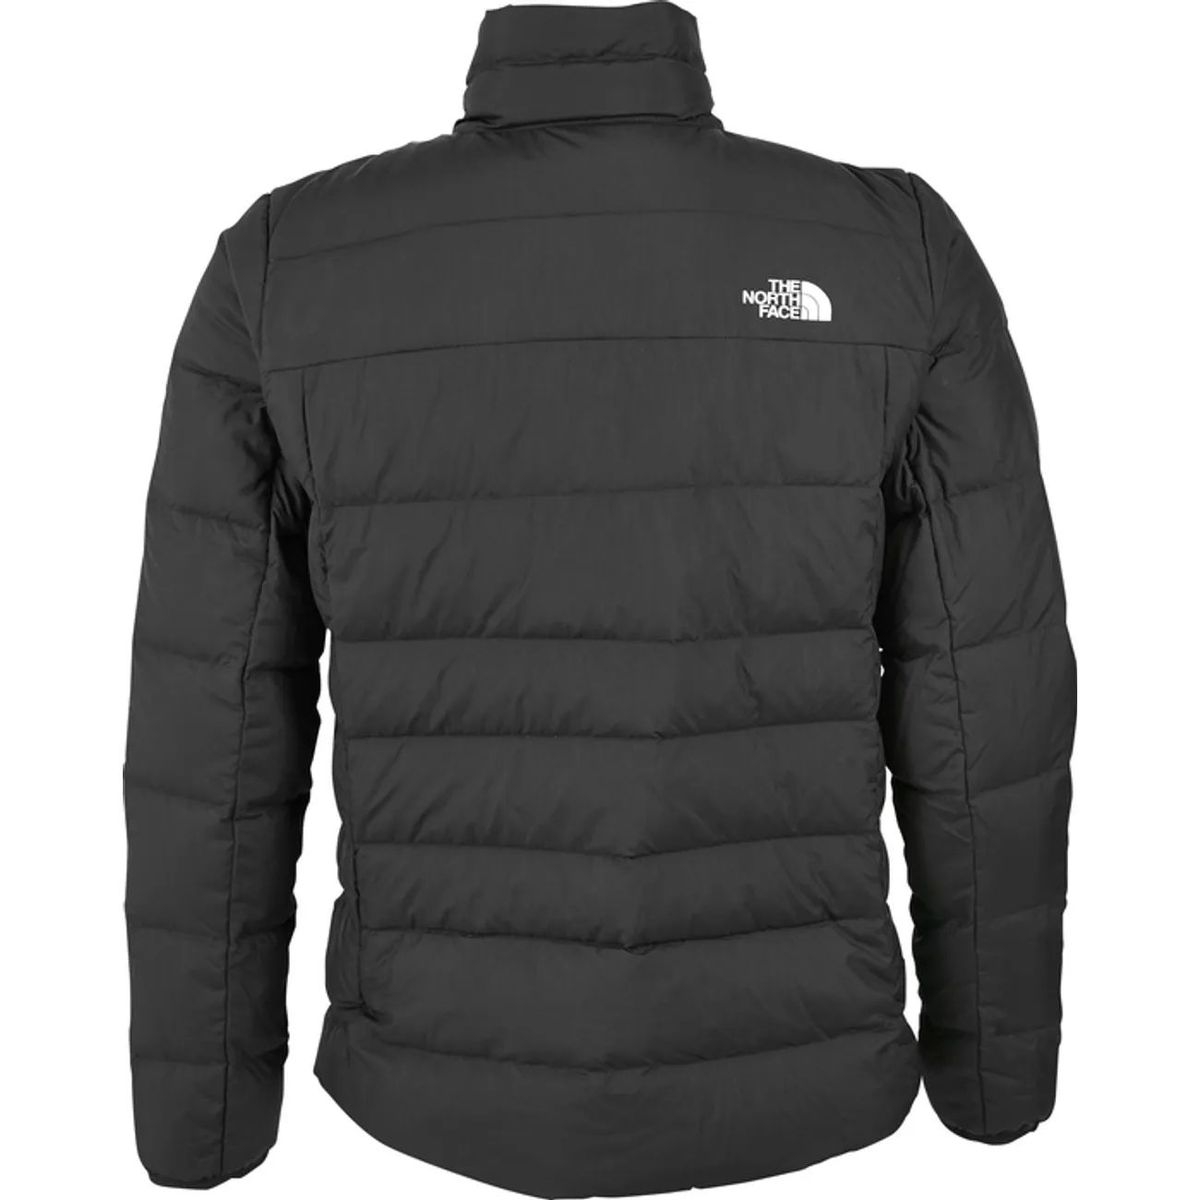 New Combal Doudoune Homme THE NORTH FACE - Taille M - Couleur